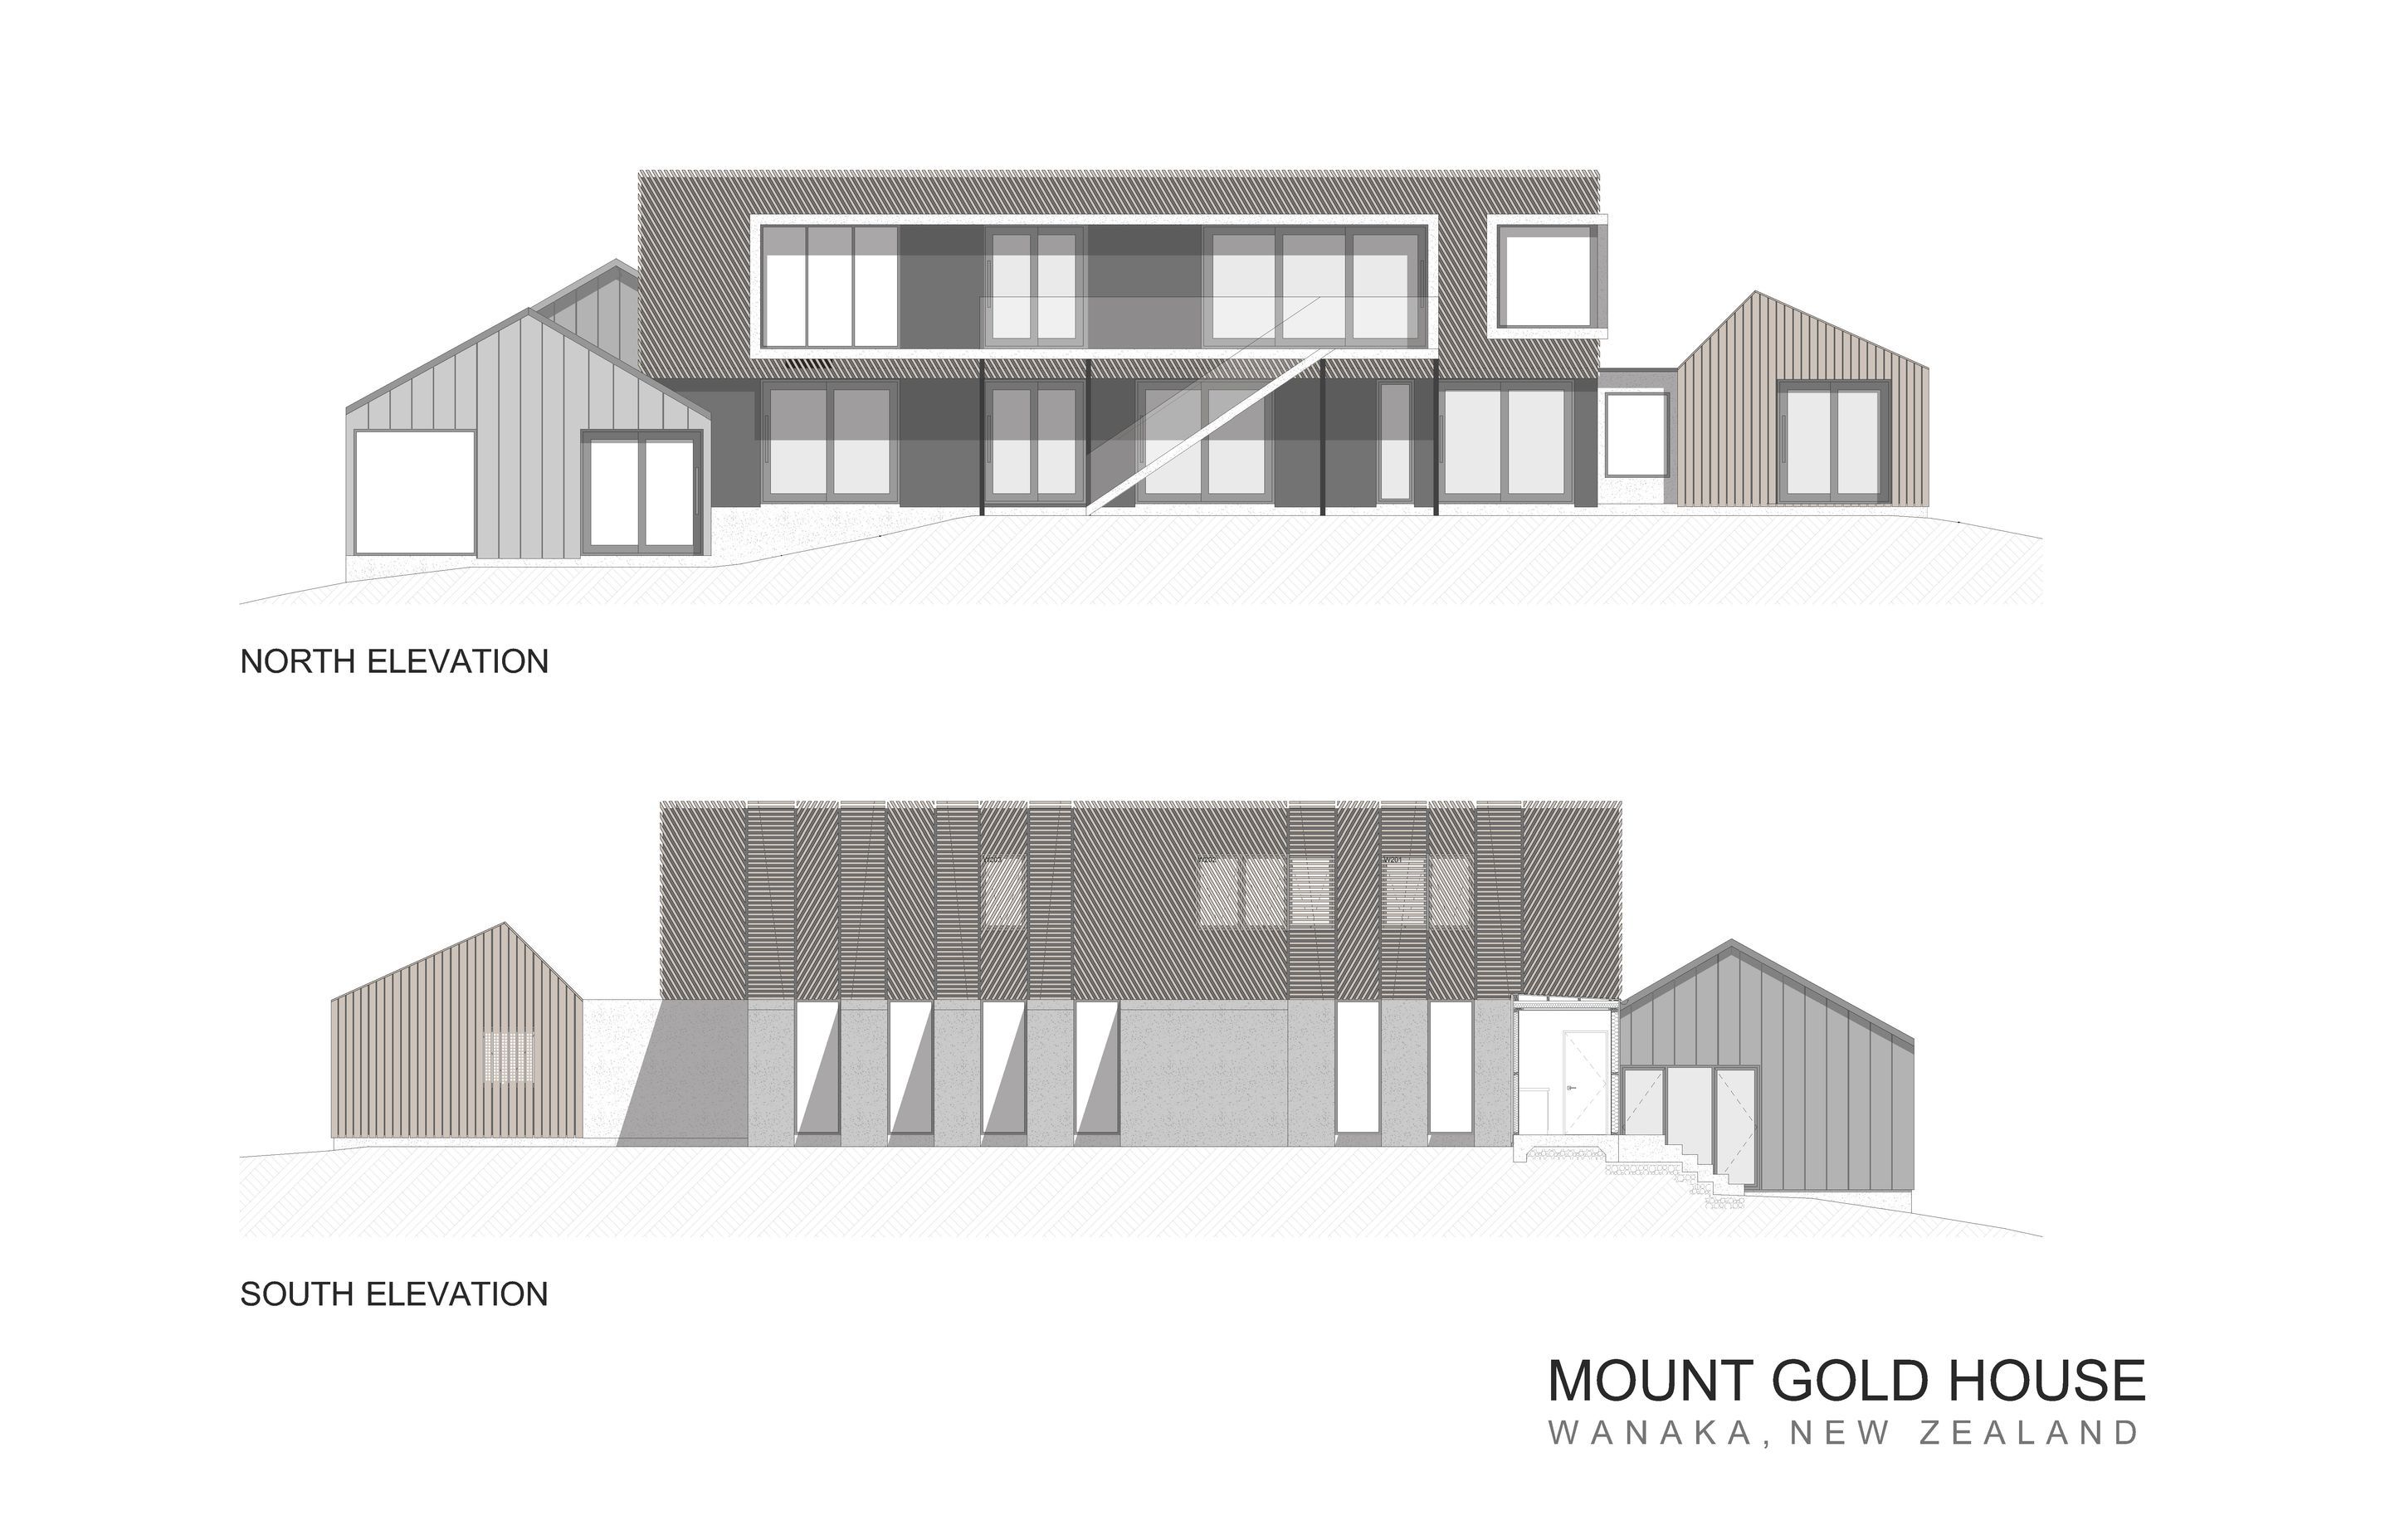 The north and south elevations of Mount Gold House by AO Architecture.